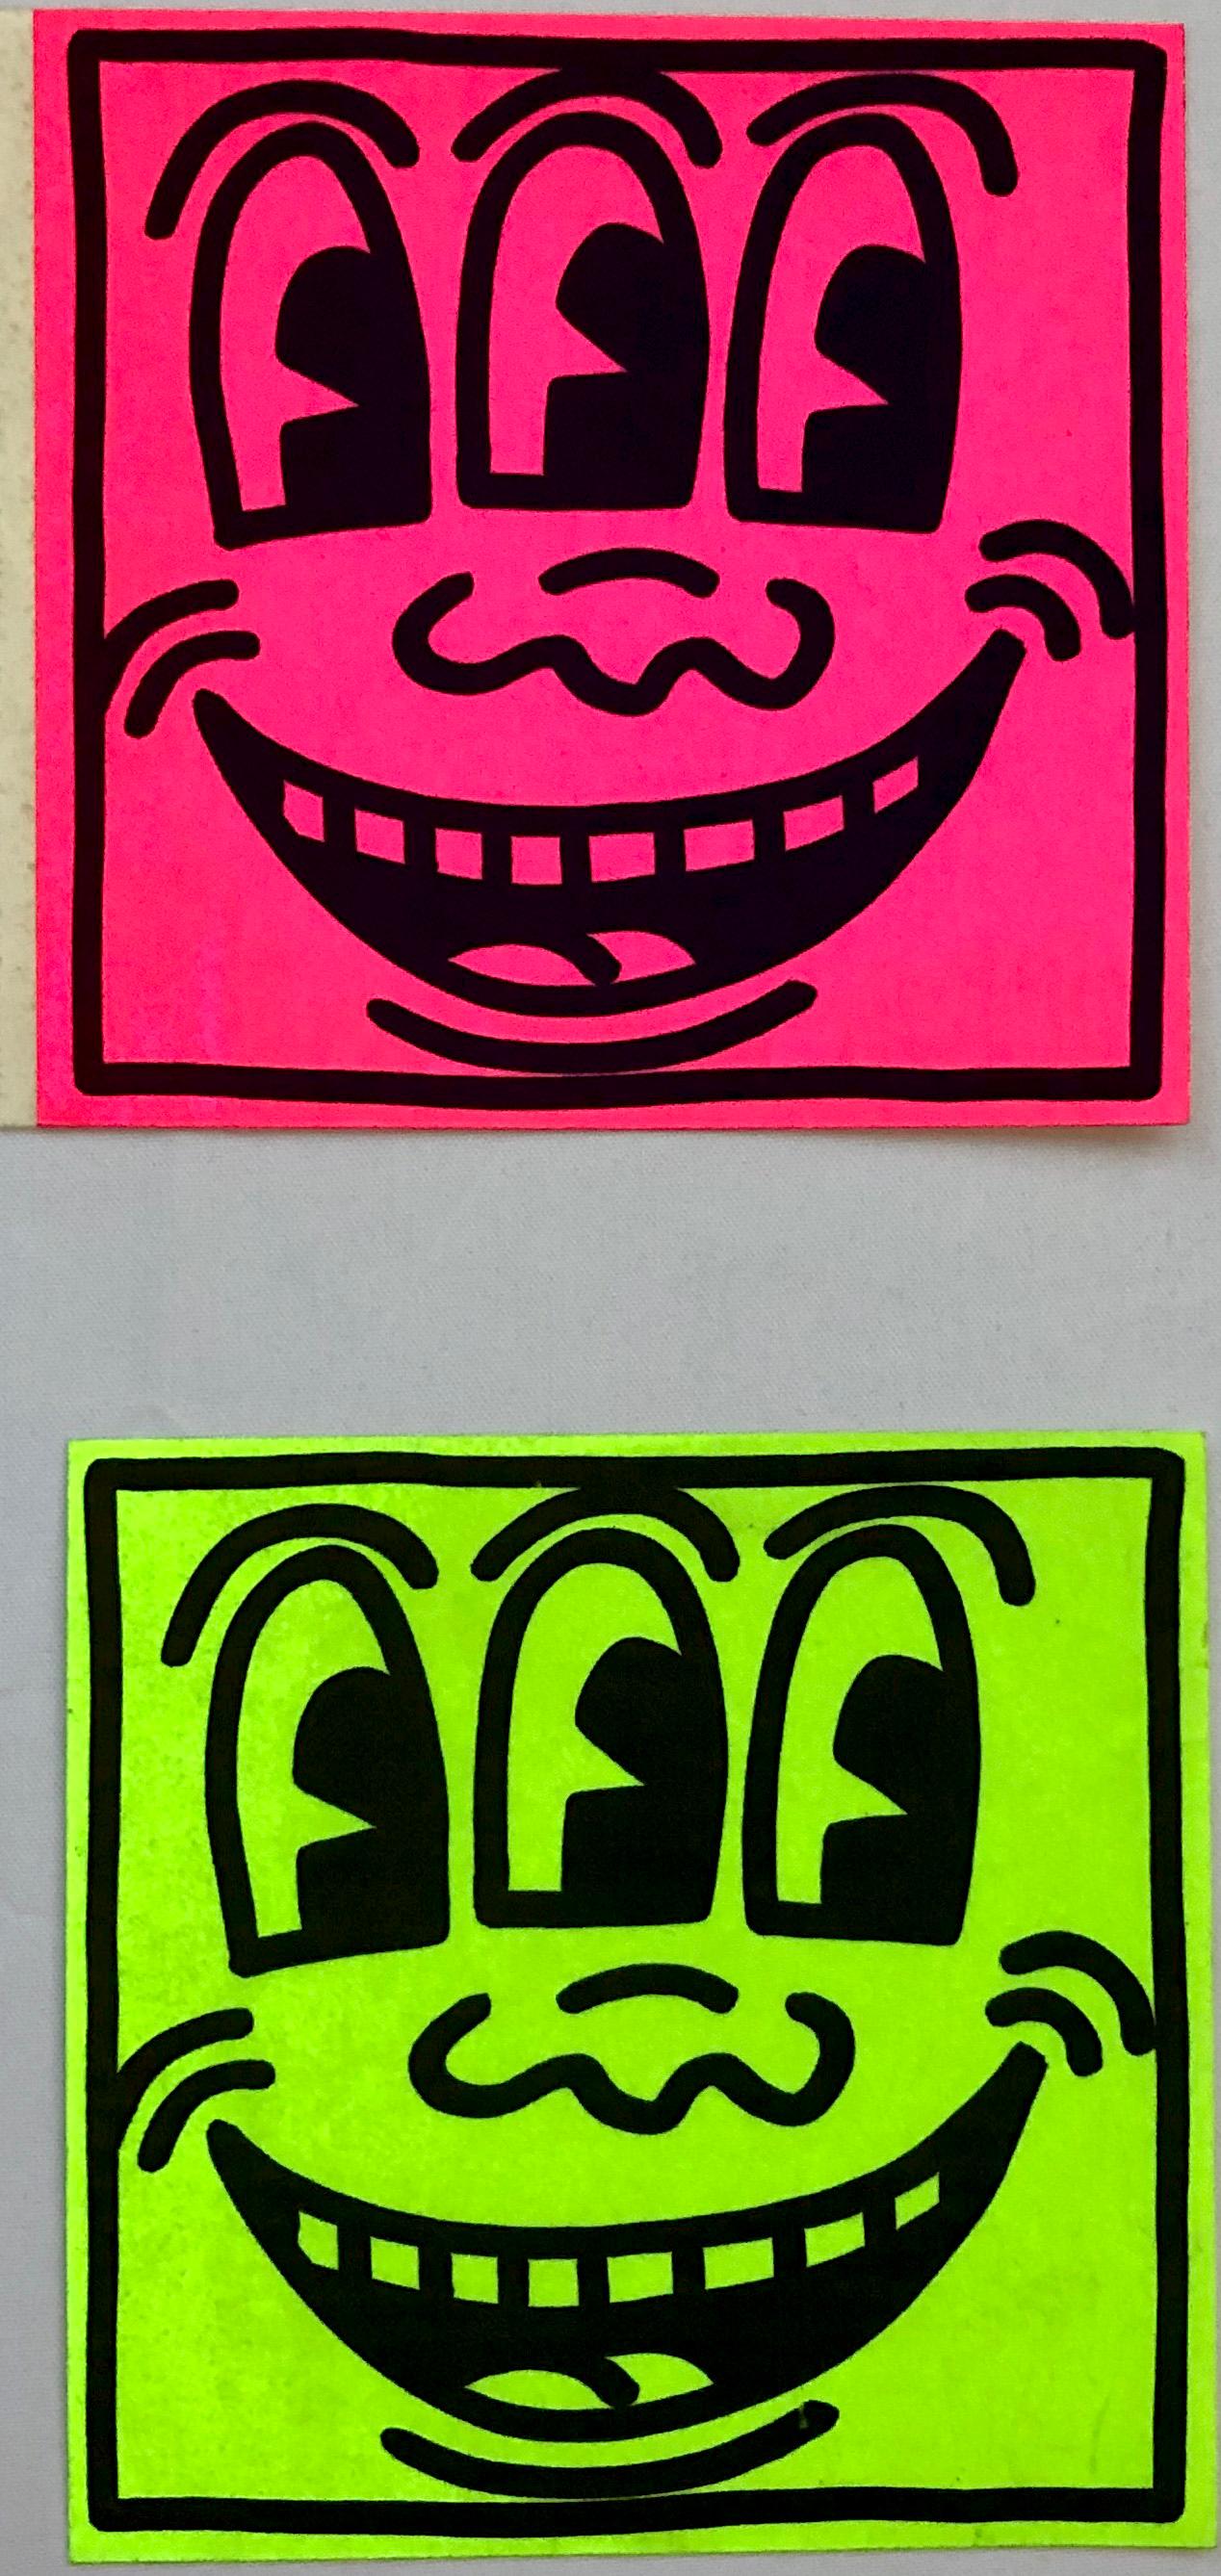 Keith Haring Three Eyed Smiling Face: Set of 3 stickers c. 1985/1986
A set of three vintage Keith Haring 1980s Pop Shop stickers c.1985/1986: Neon Pink and Neon Green Three Eyed Smiling stickers. Would look fantastic framed. 

Vintage self-adhesive